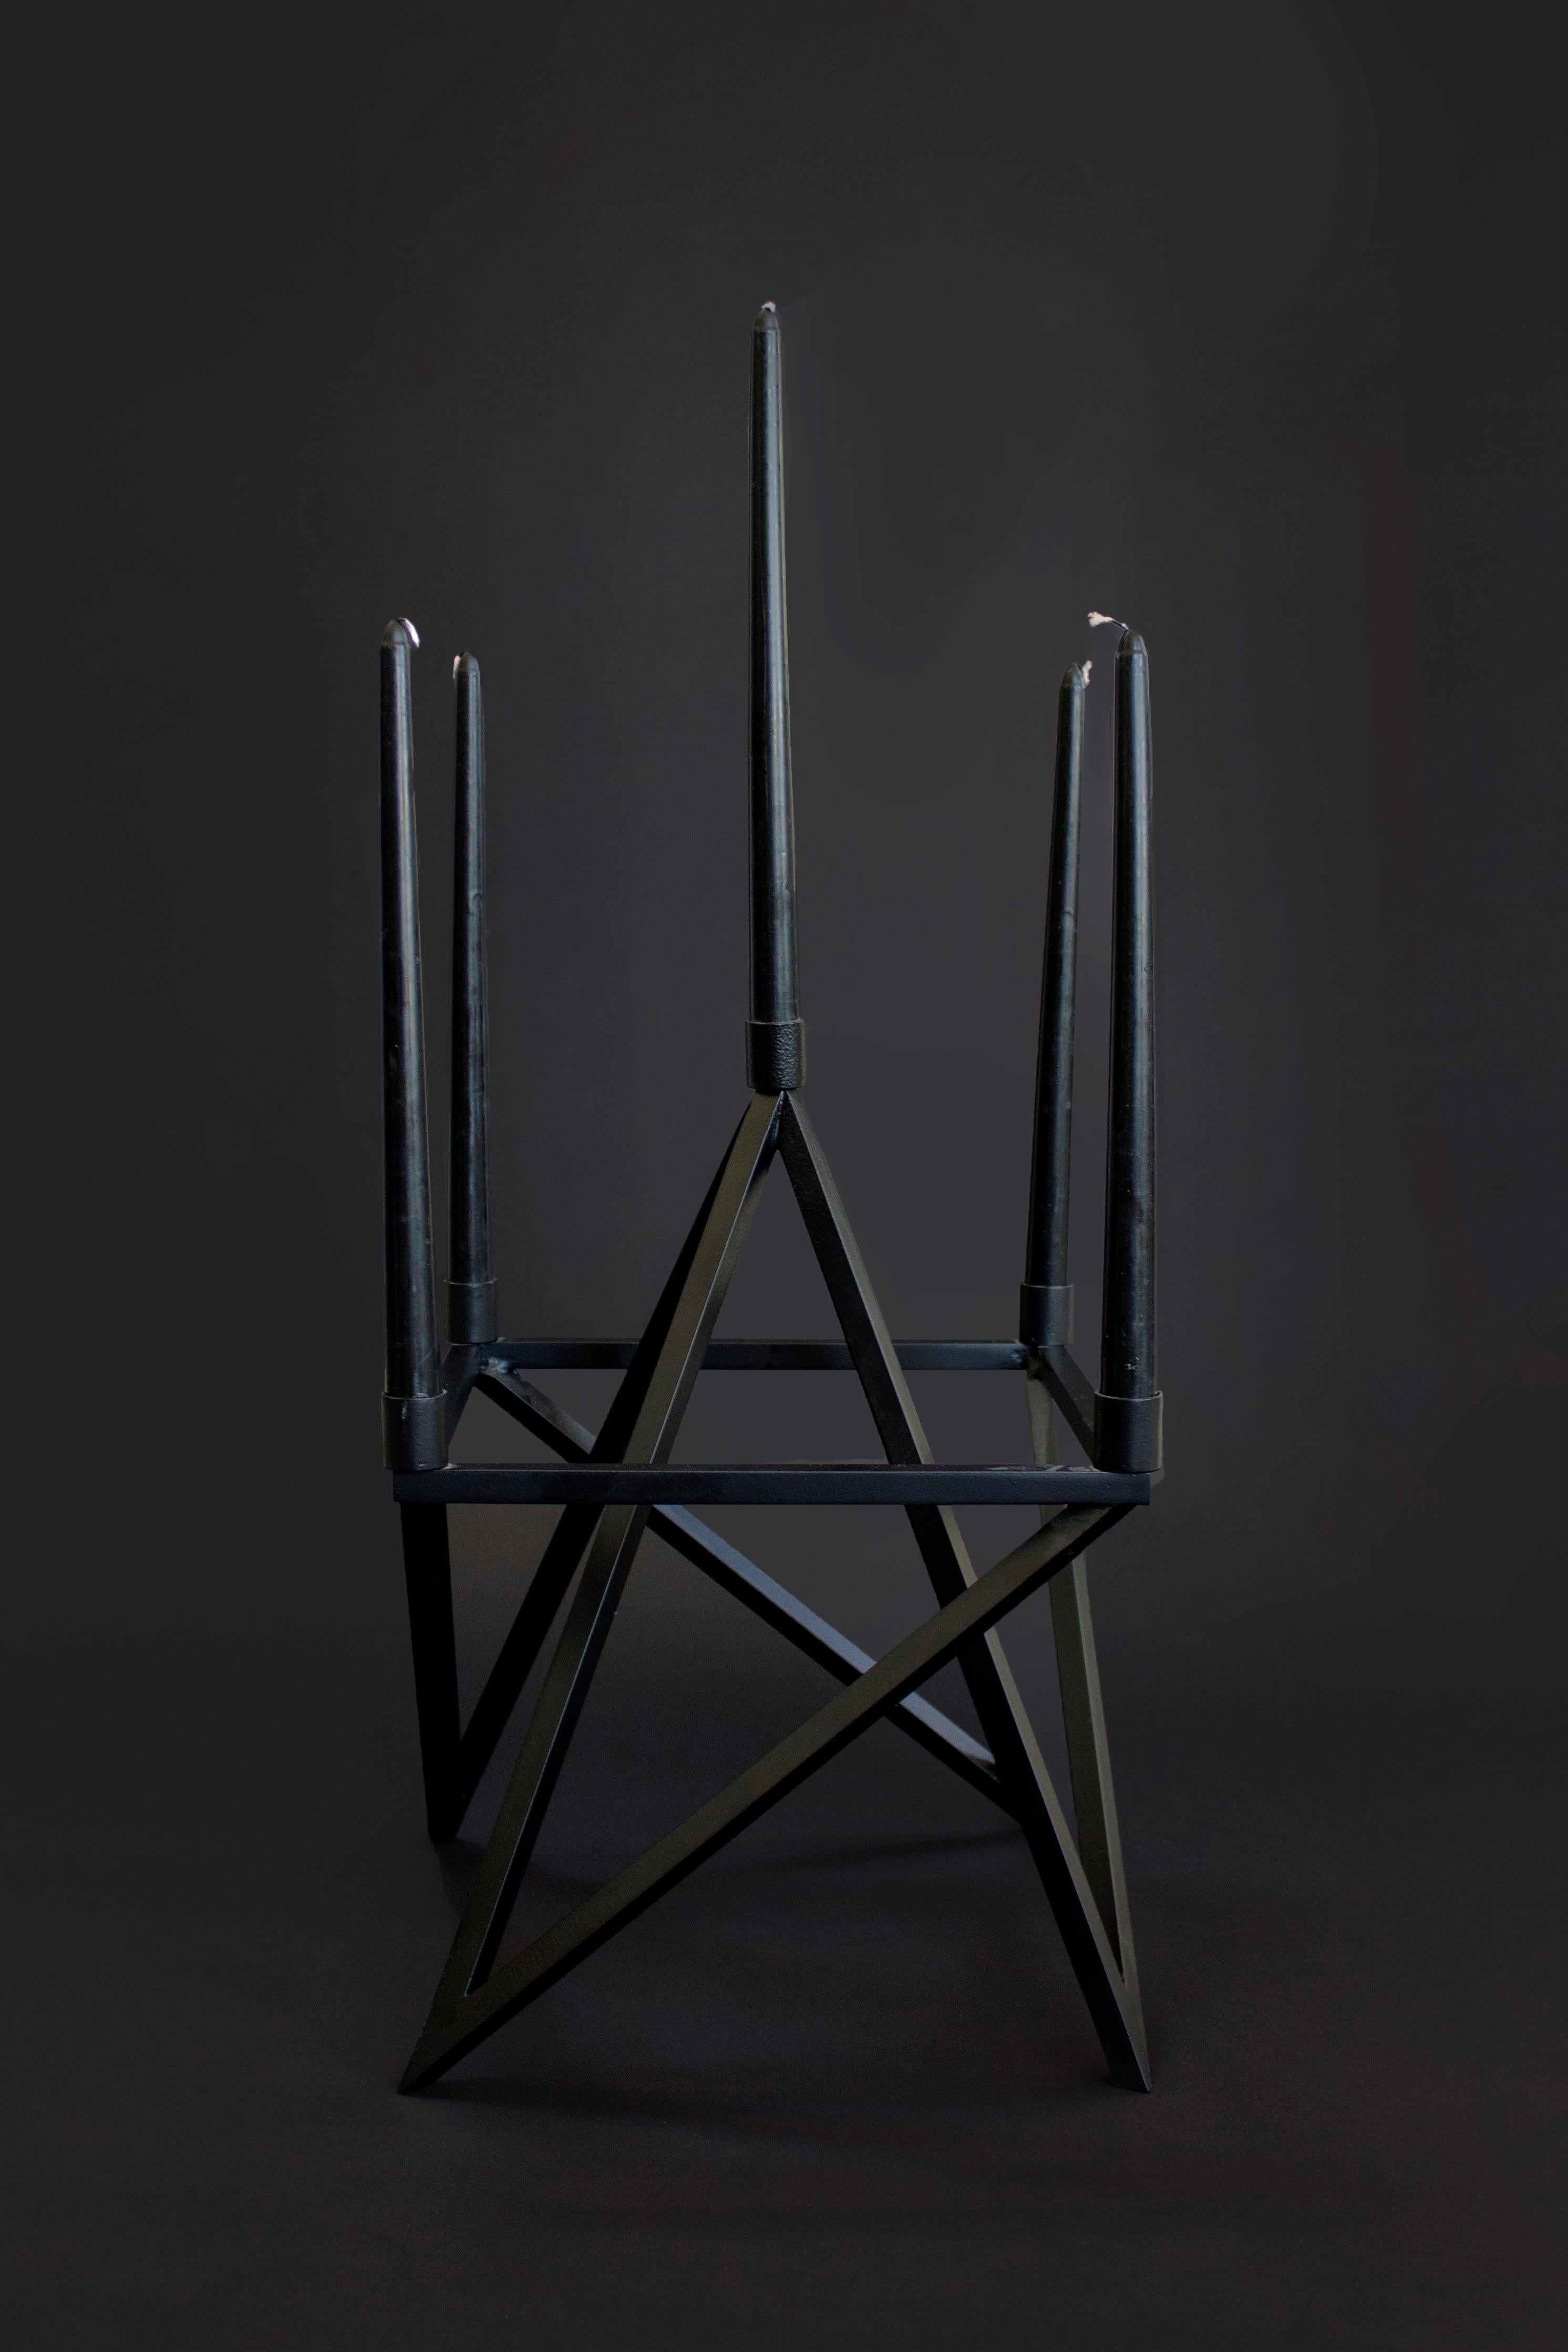 Material Lust [American, b. 1981,1986]
Pagan Candelabra, 2014 
Shown in black powder coated steel, brushed brass and nickel. 
Holds five 1